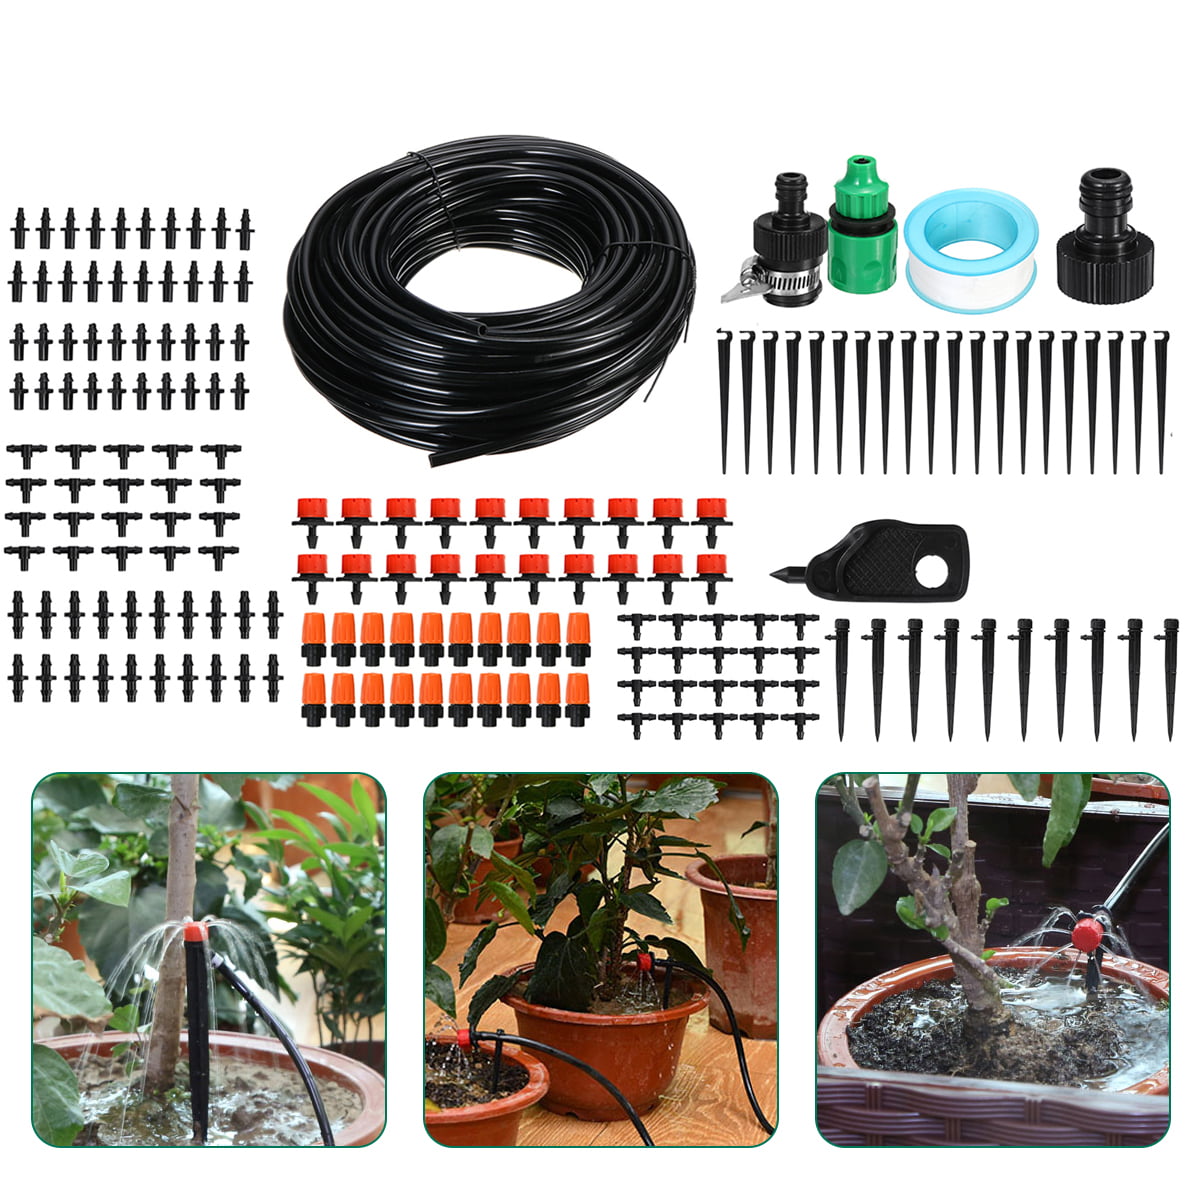 Patio Plant Watering Kit for Greenhouse Hiveseen 45M Micro Drip Irrigation System Kit with Adjustable Nozzle Sprinkler Sprayer and Dripper Automatic Landscape Lawn Terrace Flower Bed